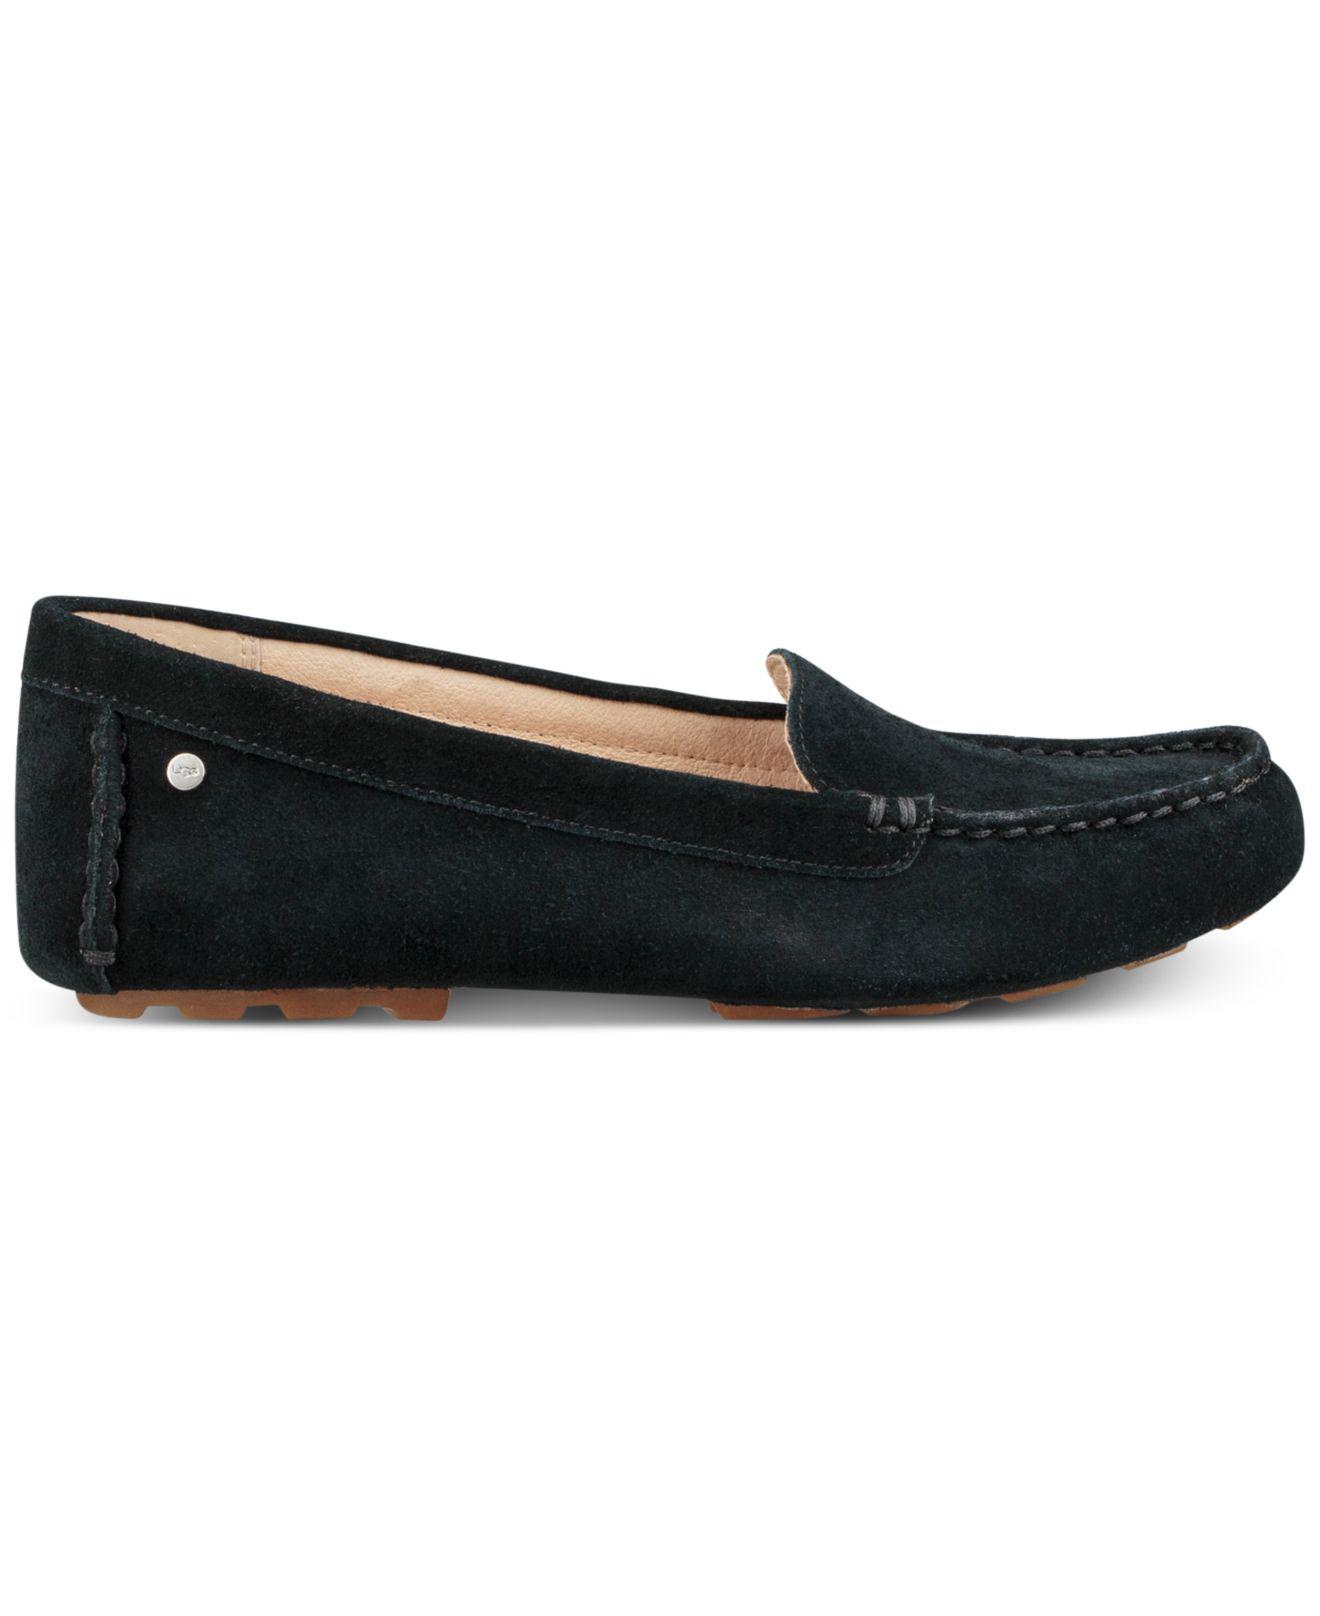 UGG Milana Unlined Loafers in Black - Lyst